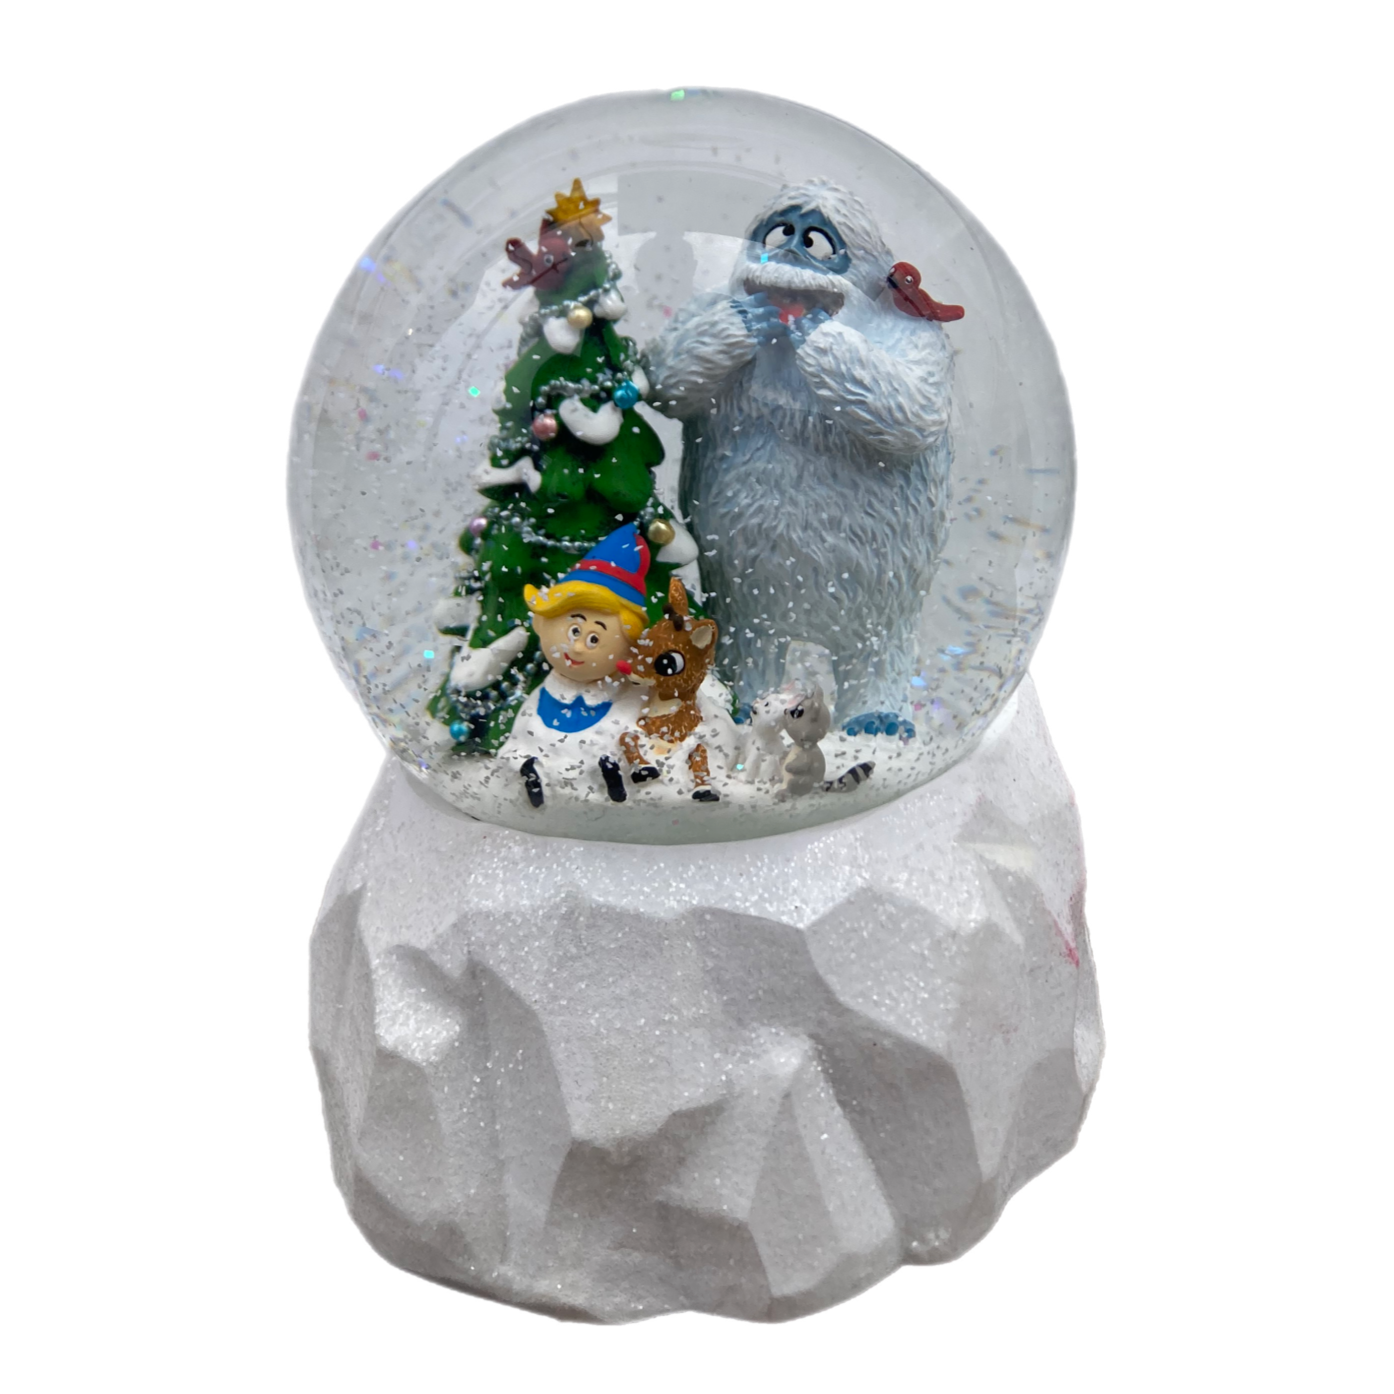 Rudolph With Friends Snowglobe